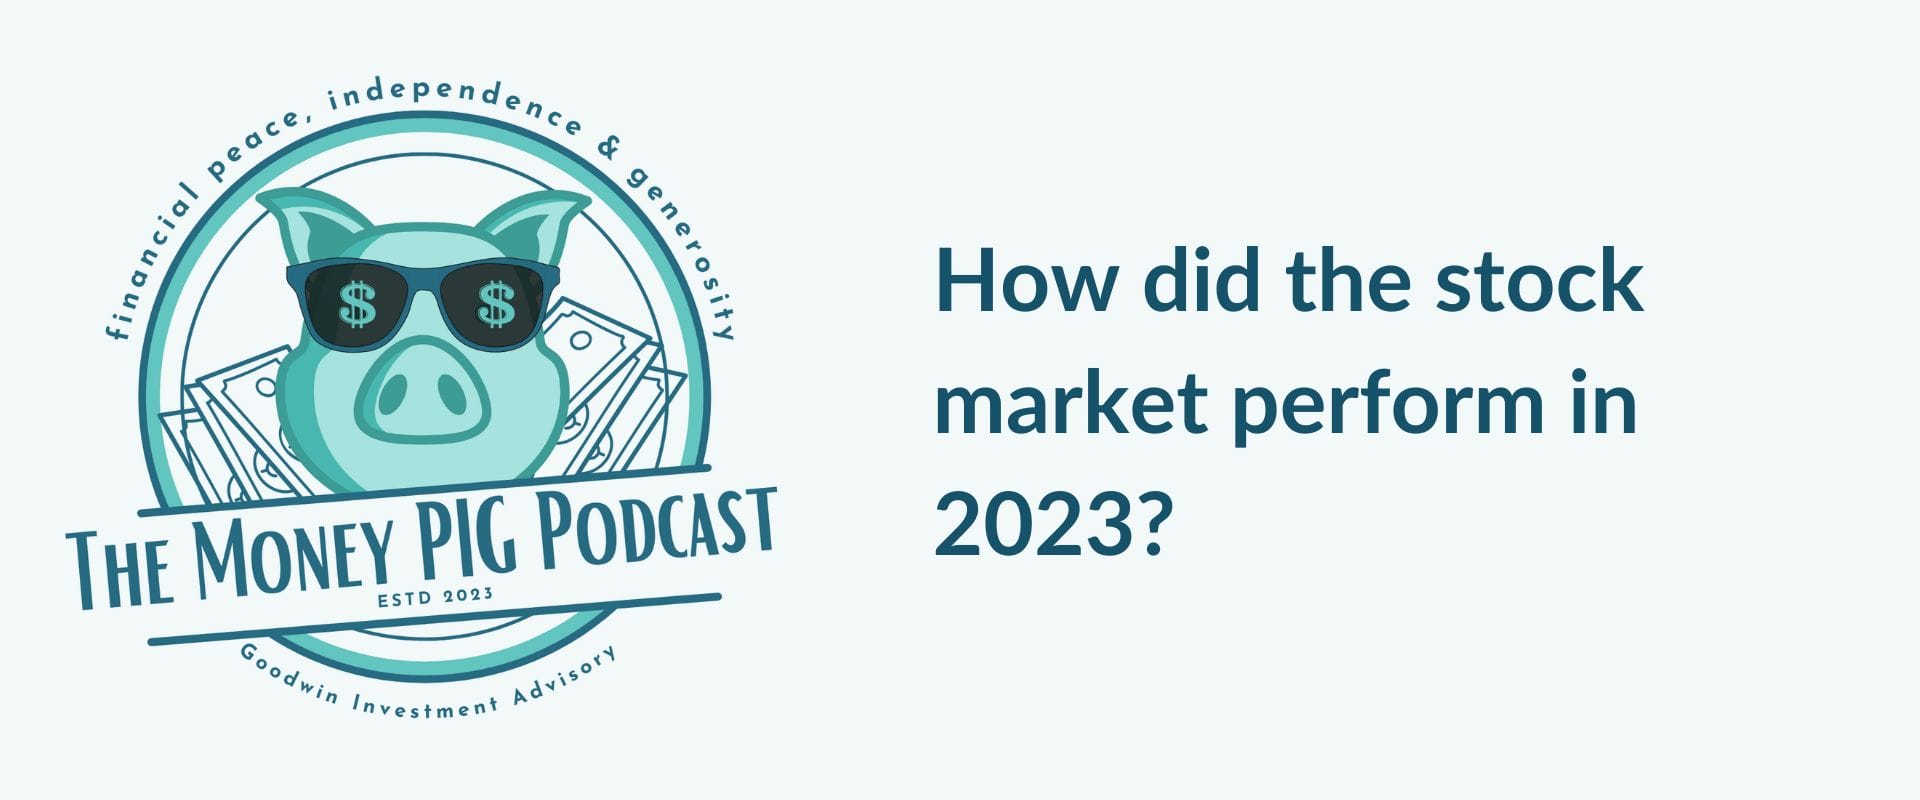 How did the stock market perform in 2023?